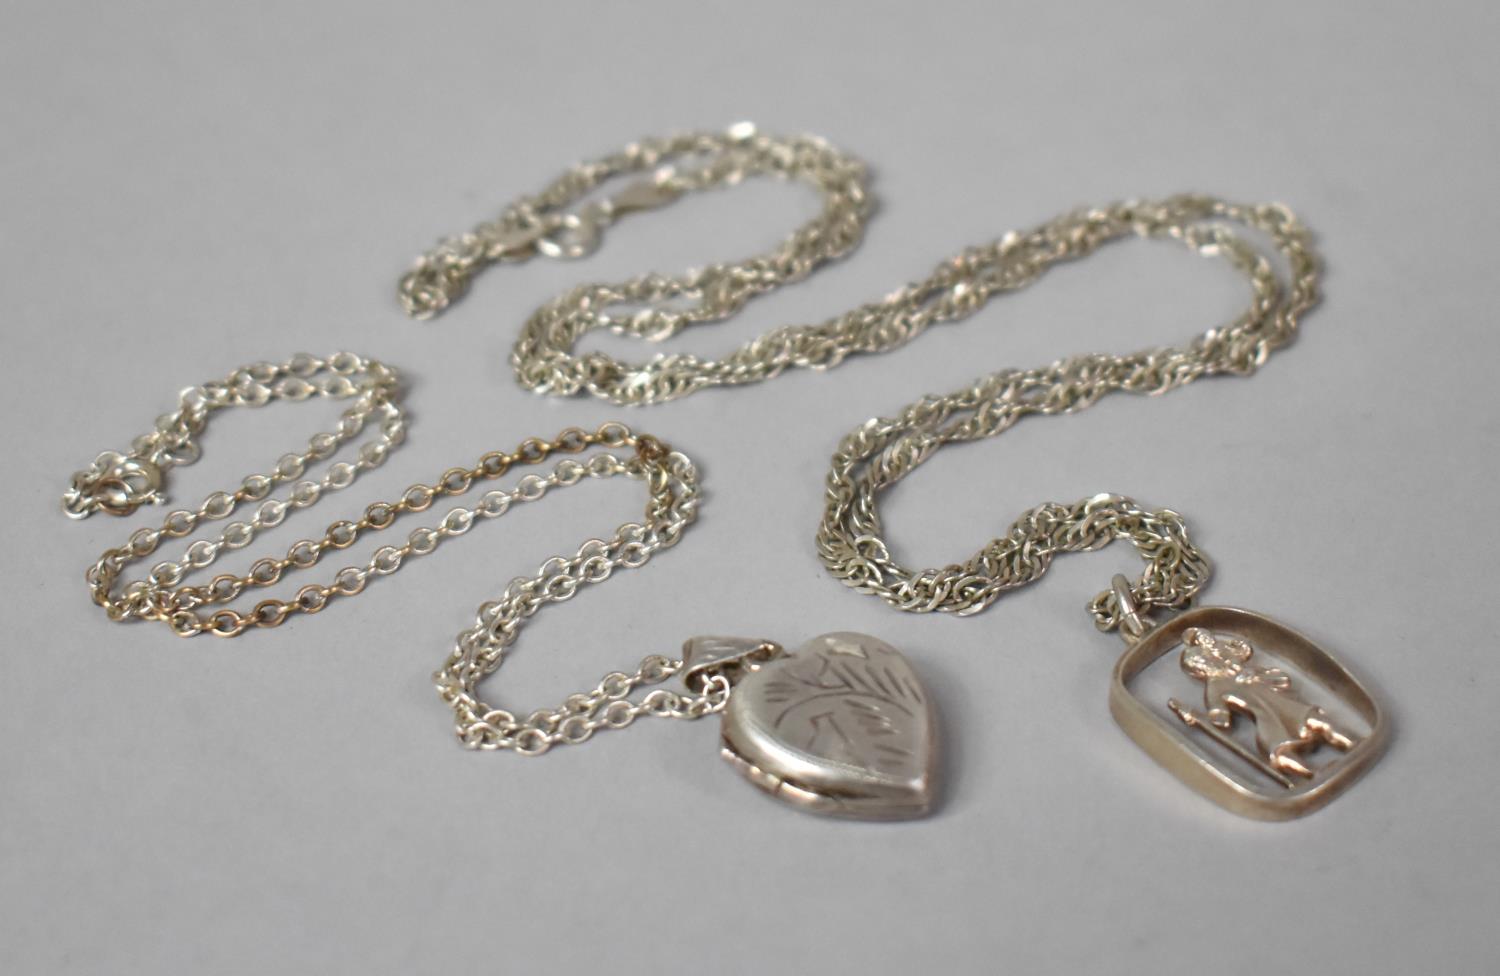 A Silver Heart Shaped Locket Pendant and a St. Christopher Pendant on Silver Chains